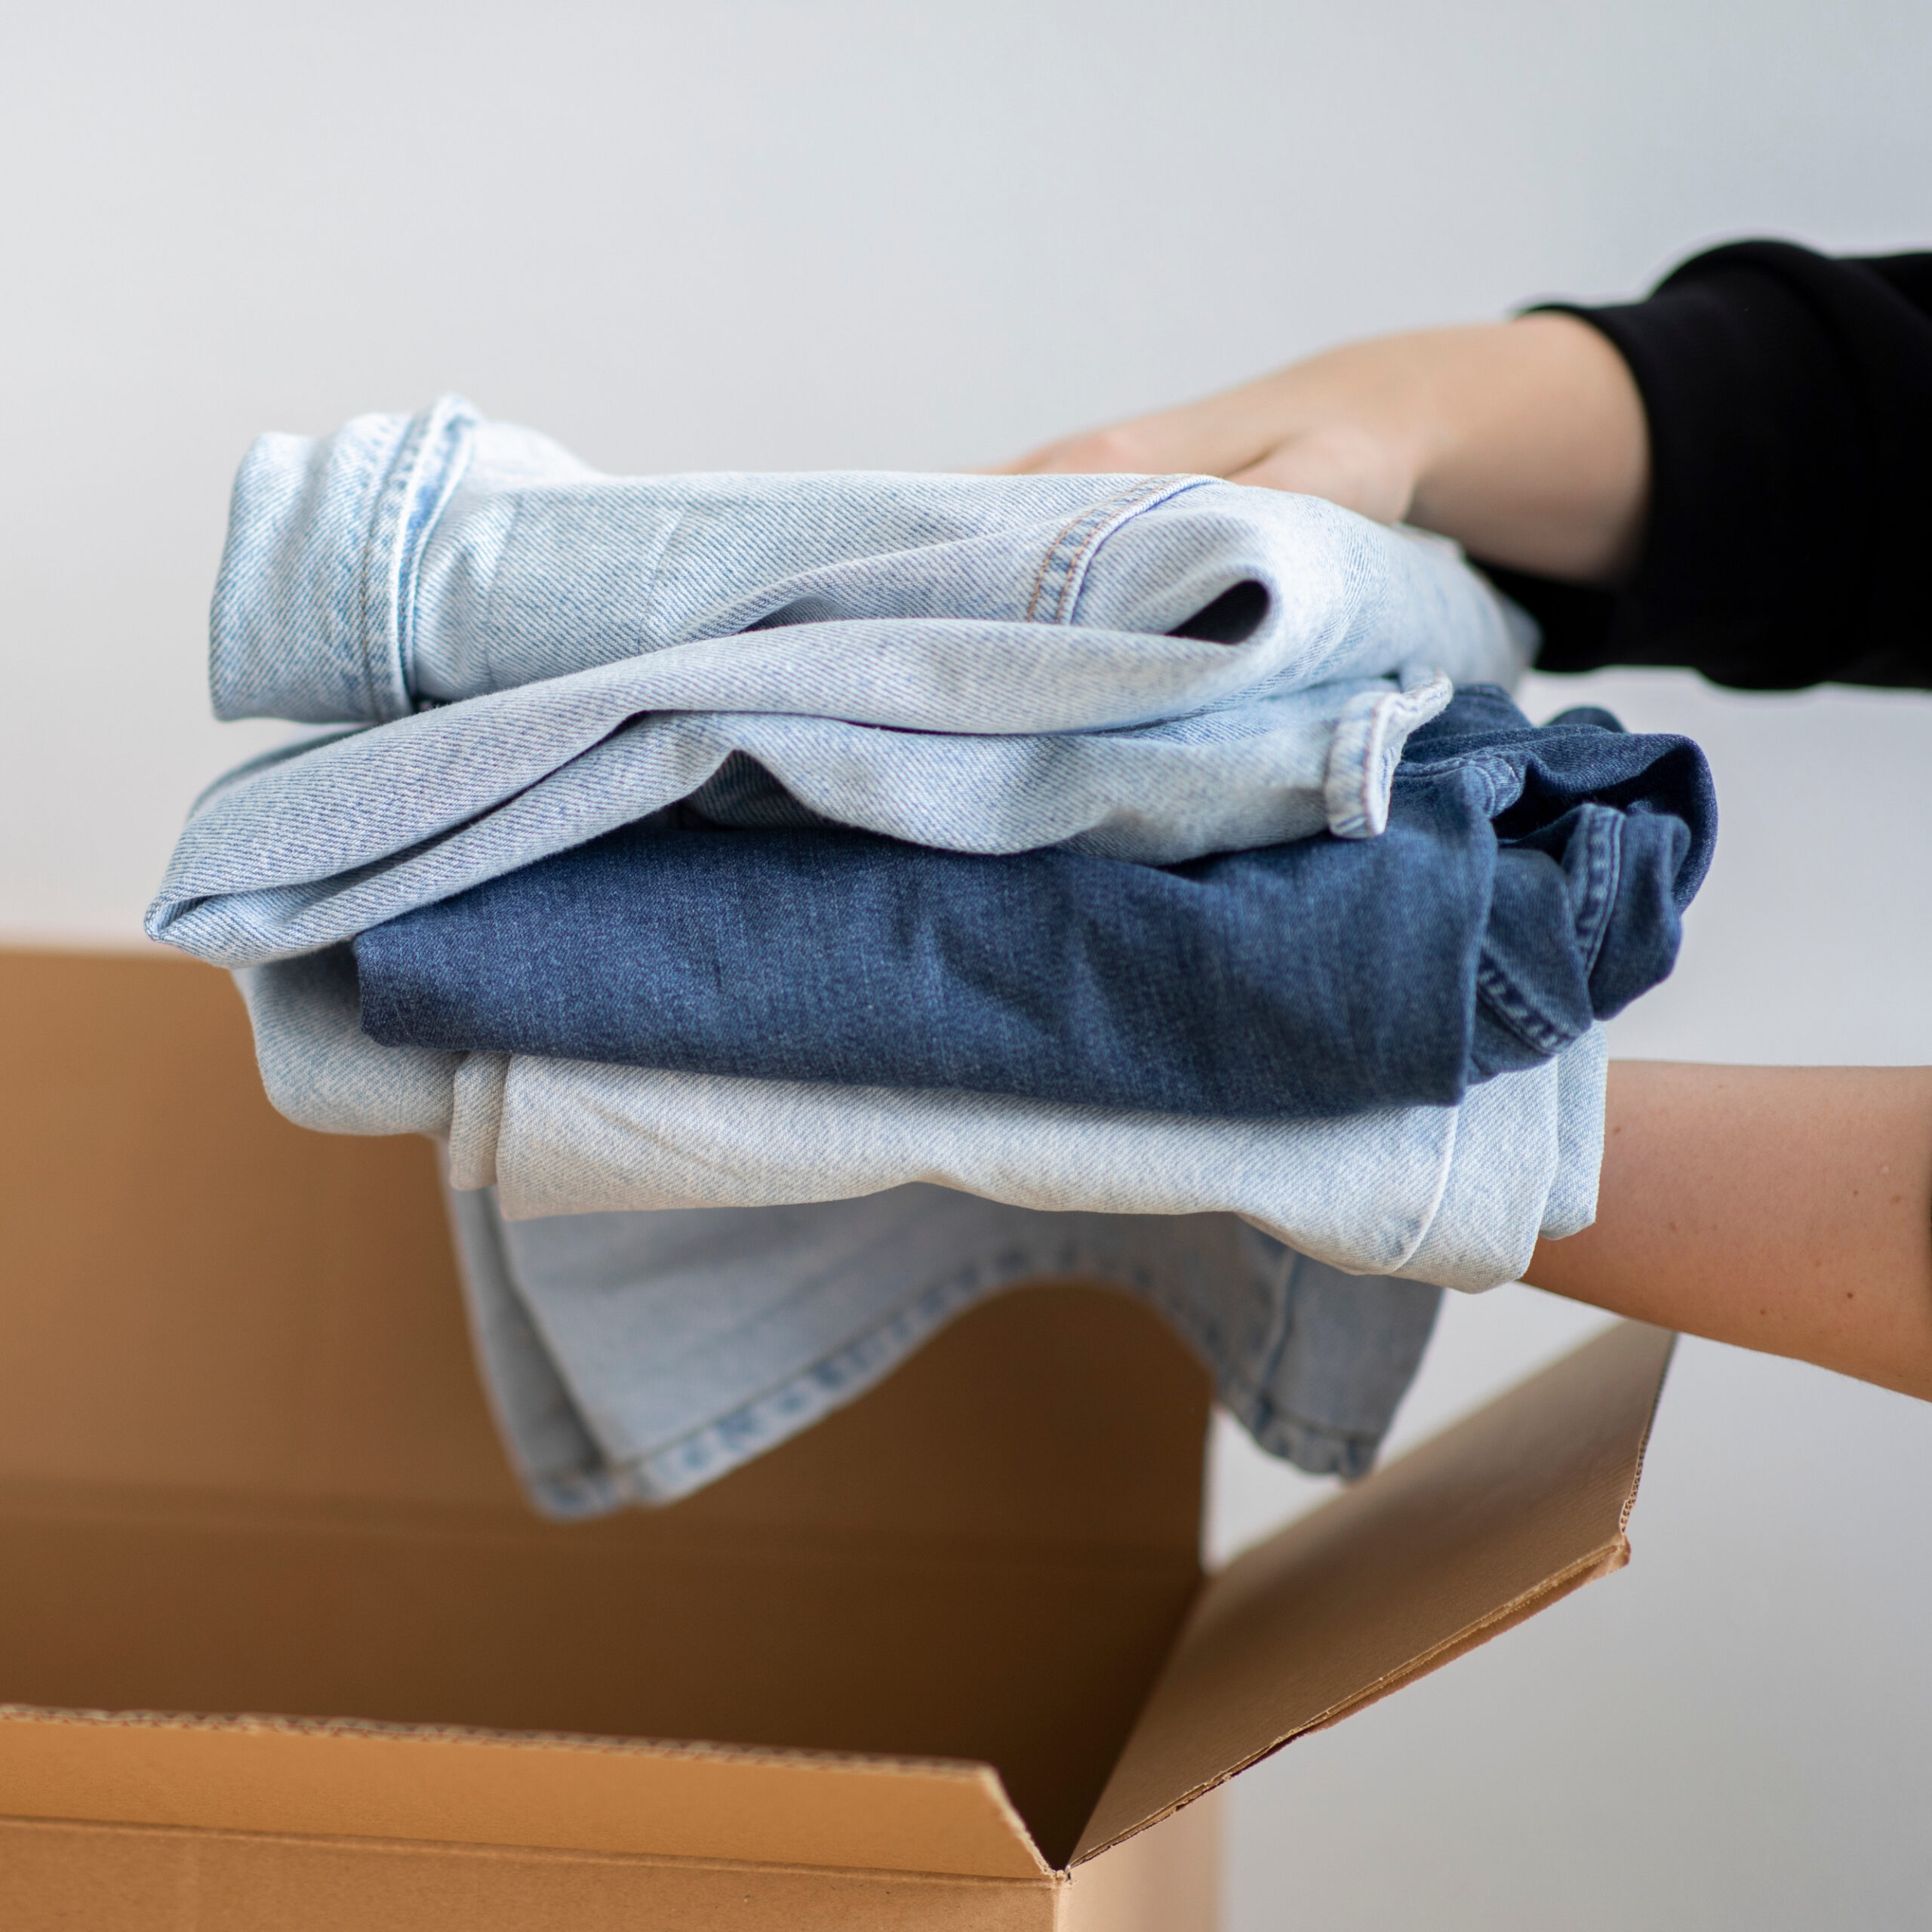 Image of a person's hands holding a pile of folded jeans over a cardboard box.